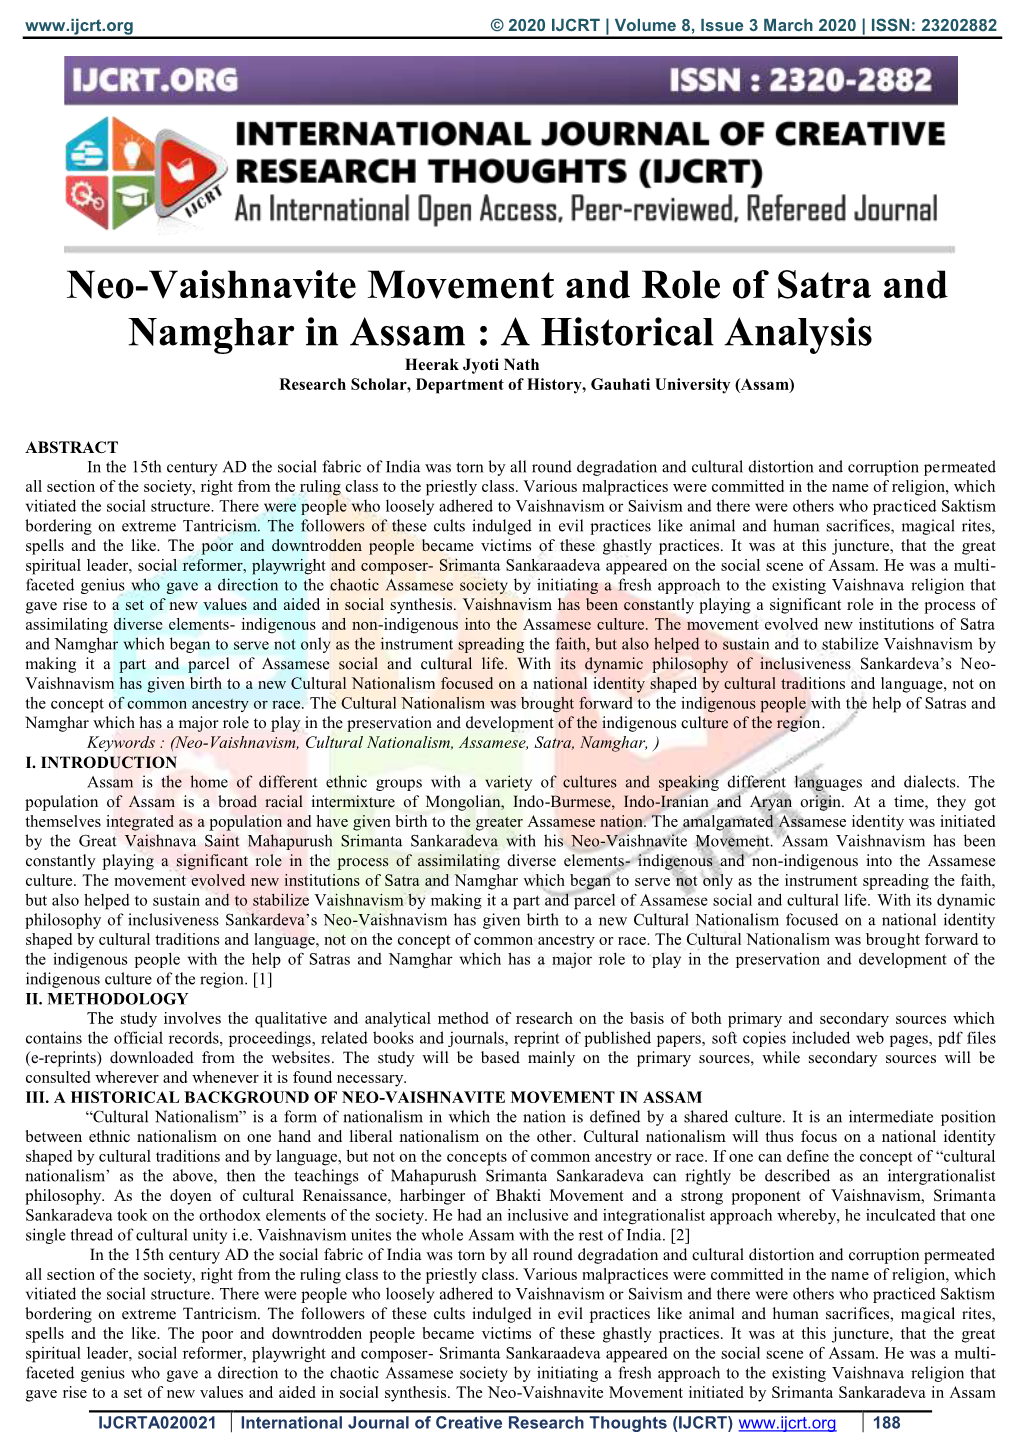 Neo-Vaishnavite Movement and Role of Satra and Namghar In